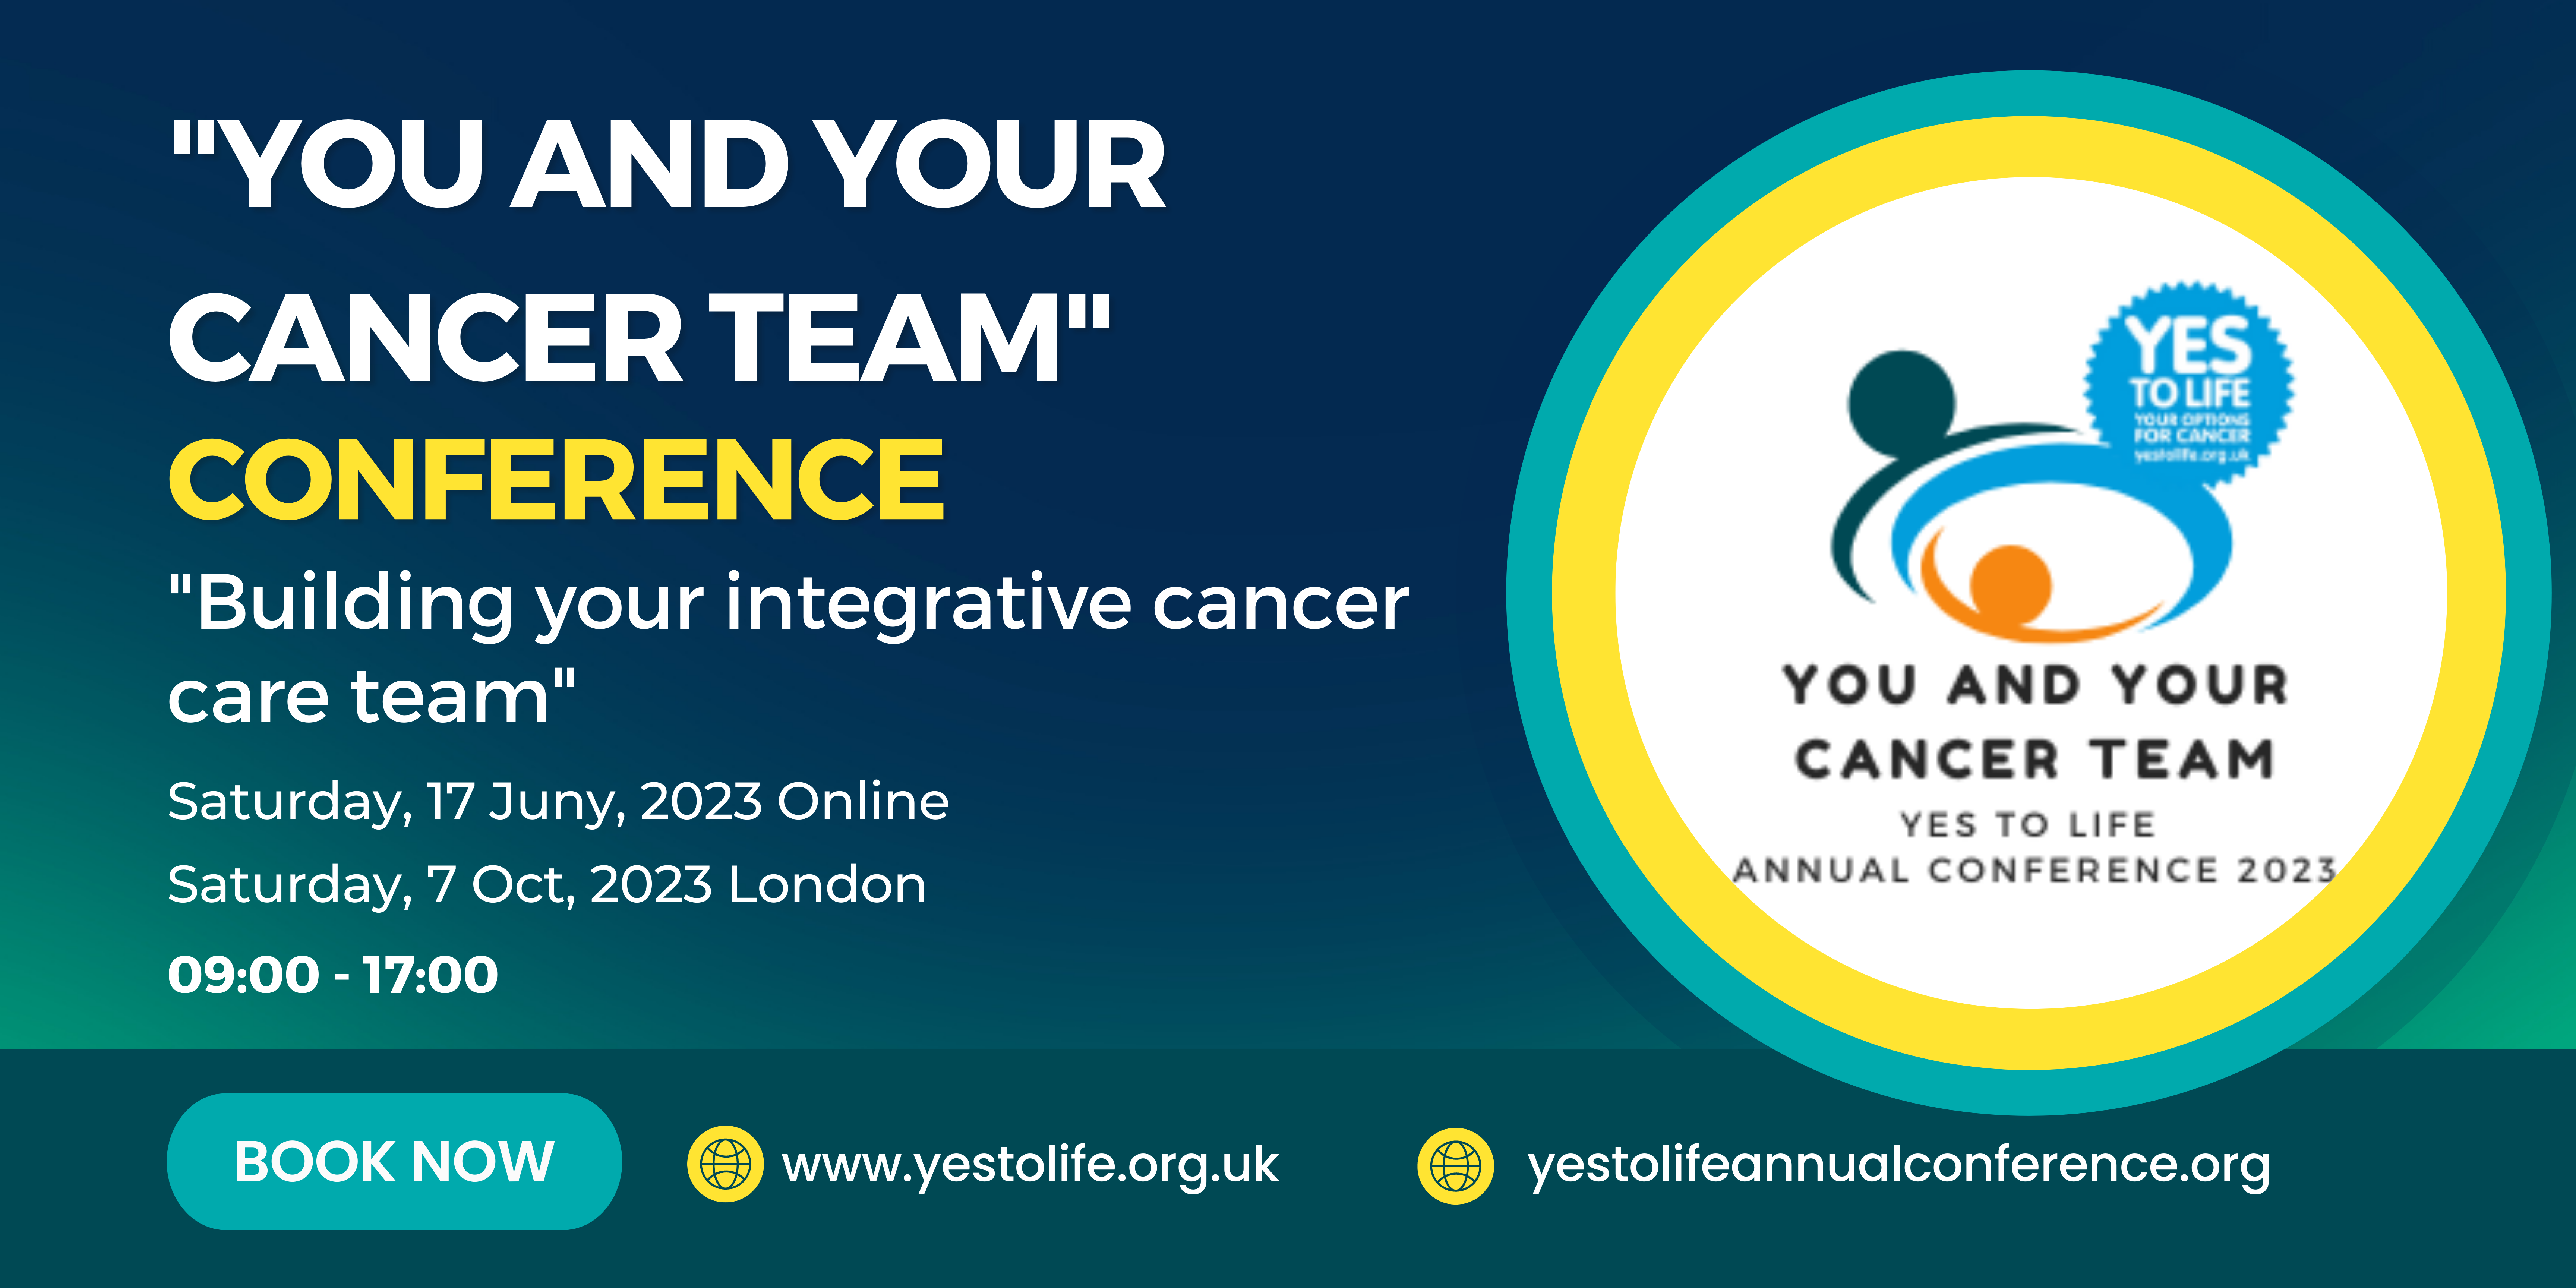 Annual Conference 2023 "You and Your Cancer Team" Part 2 Live in London